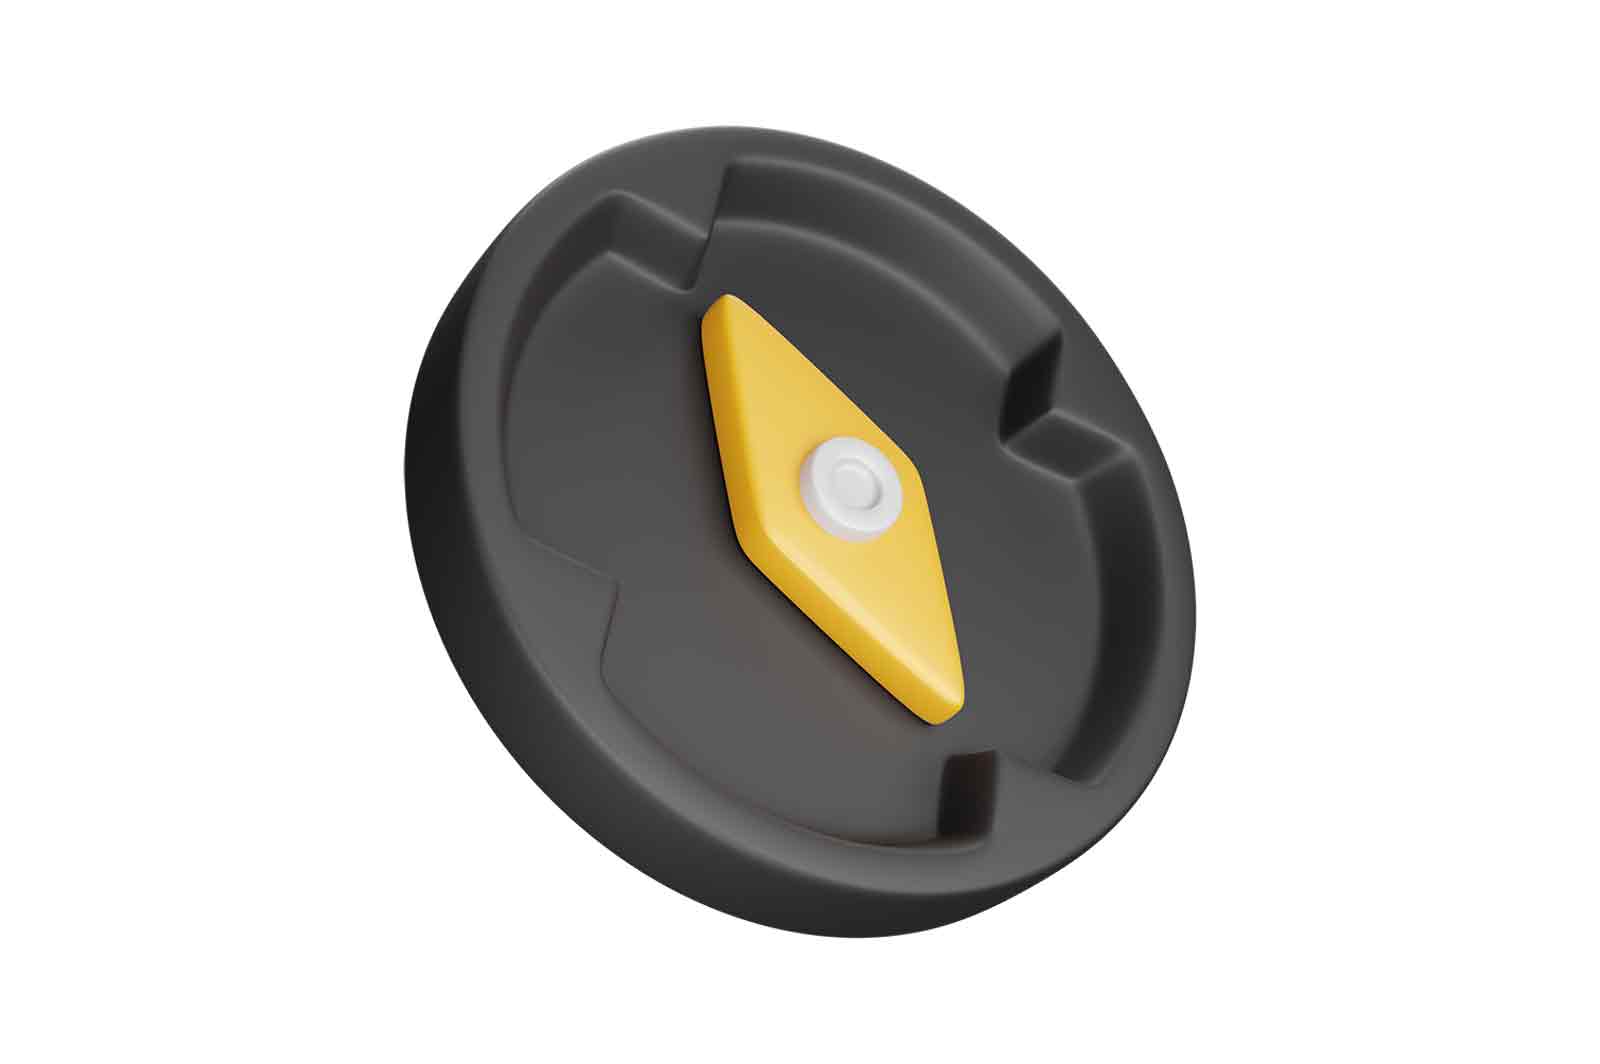 Compass or navigation device for tourists 3d rendered icon illustration. Topography instrument and orientation object